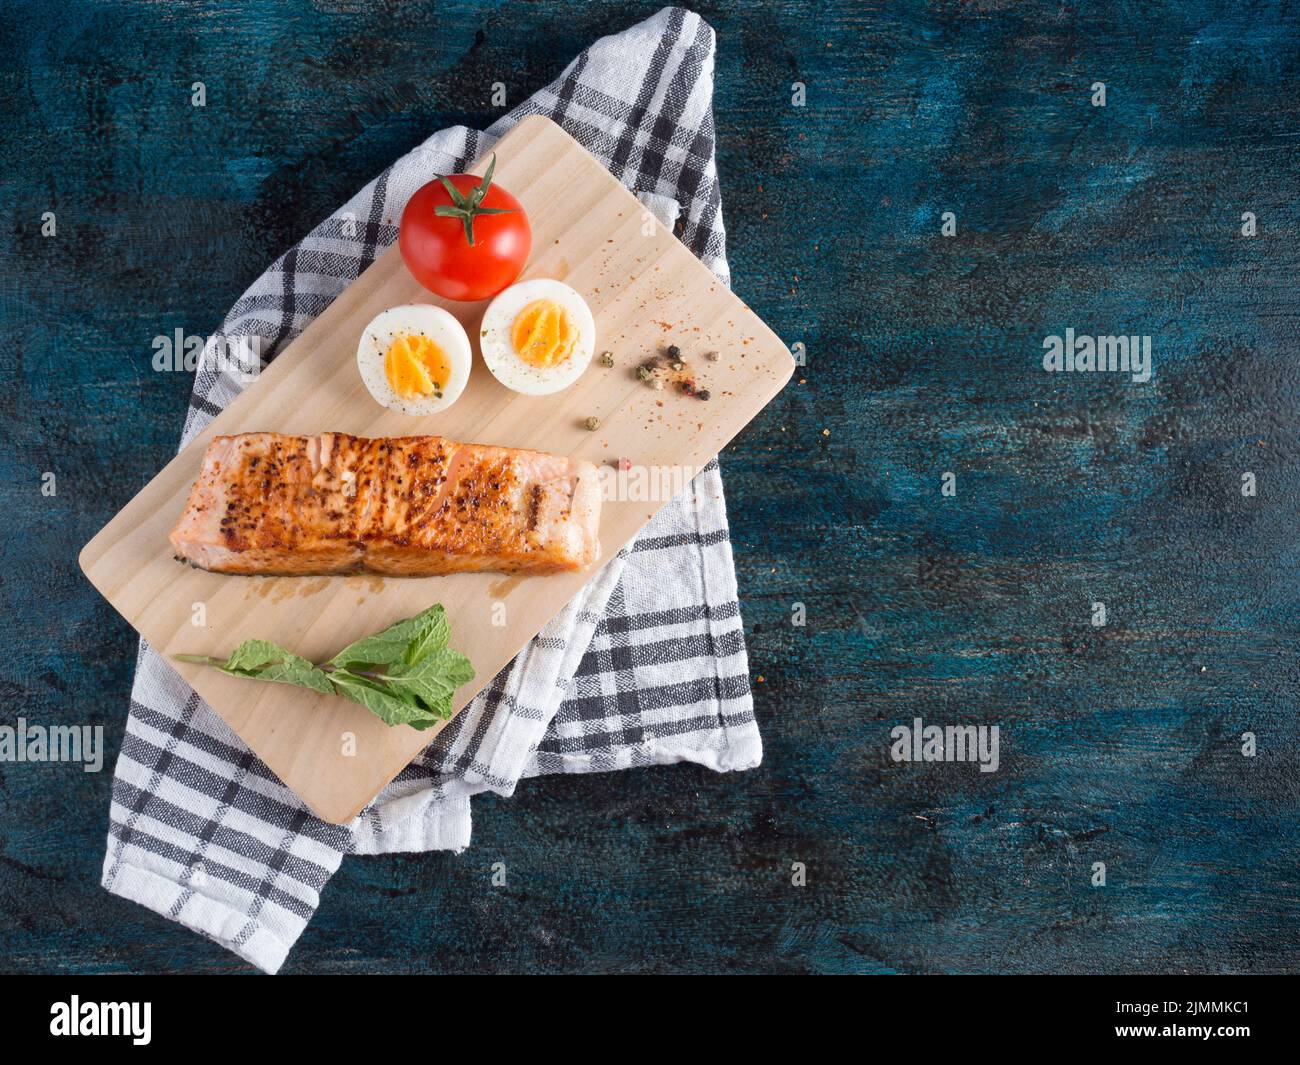 Roasted salmon with boiled egg board Stock Photo